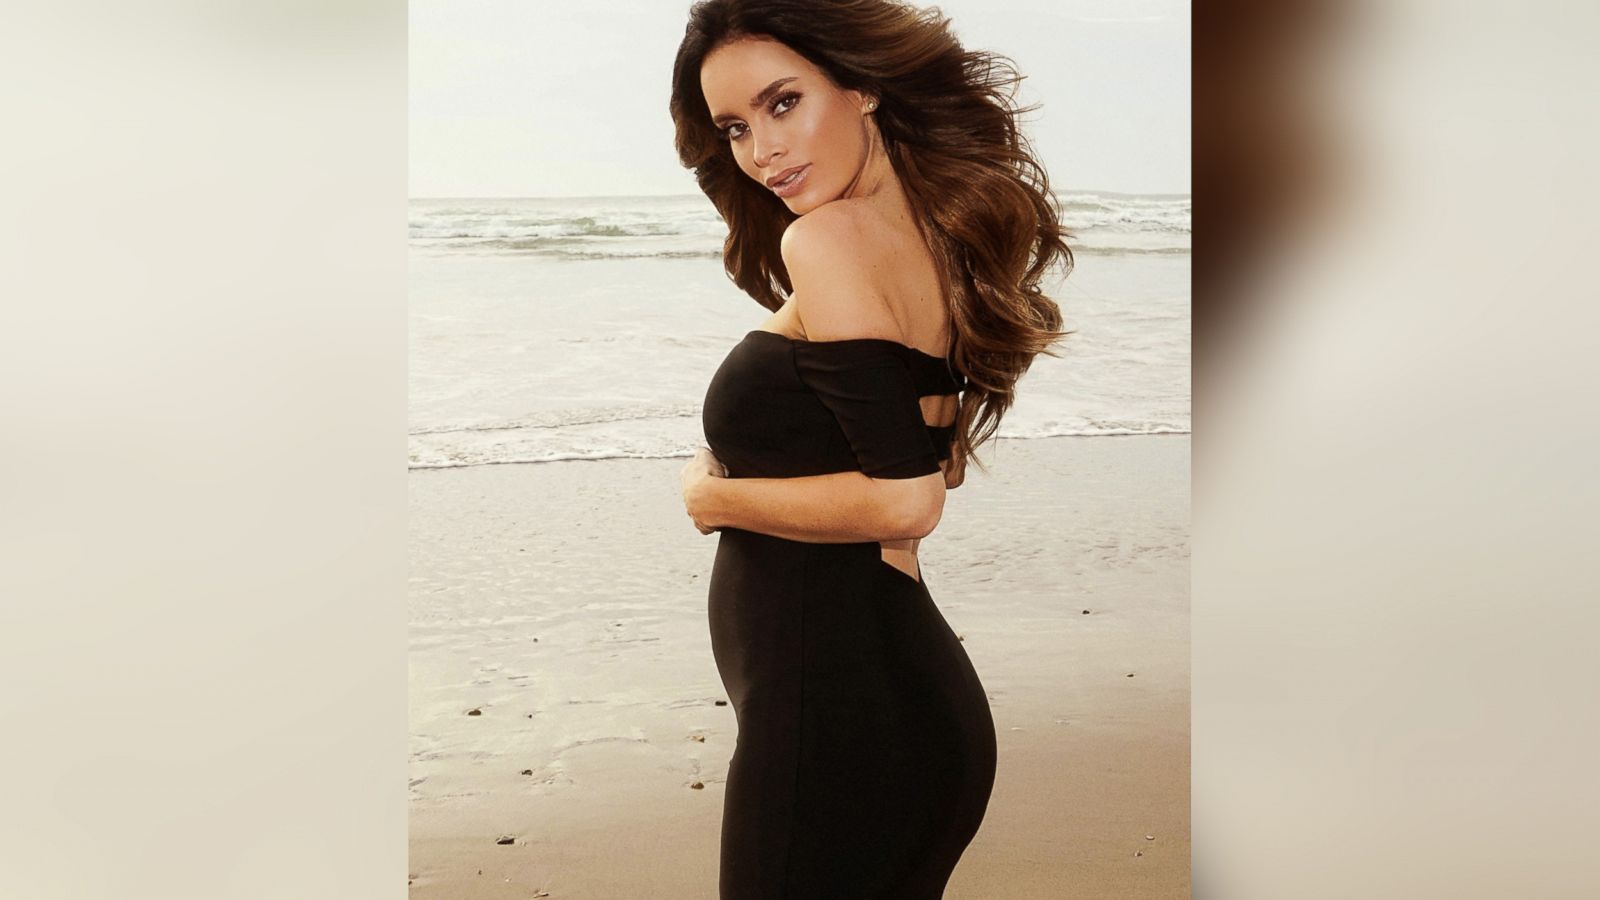 Pregnant Model Sarah Stage's Tiny Belly Causes Social Media Uproar - ABC  News